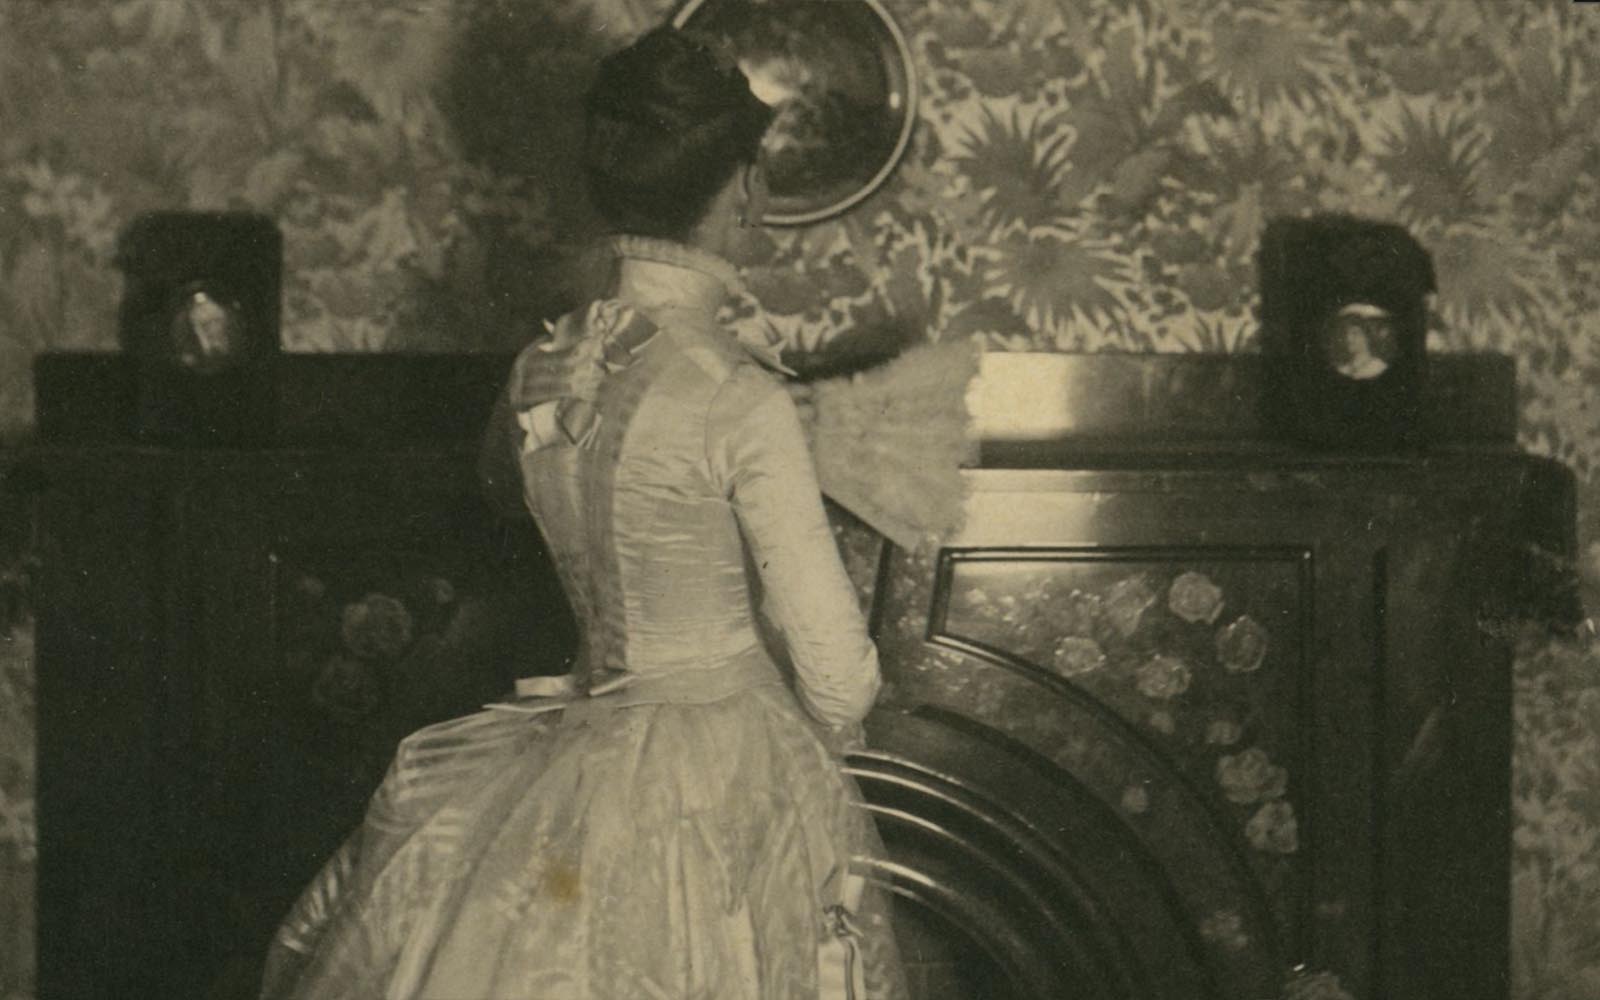 A woman in a white wedding dress with a bustle, high collar, and long sleeve, faces away from the camera.